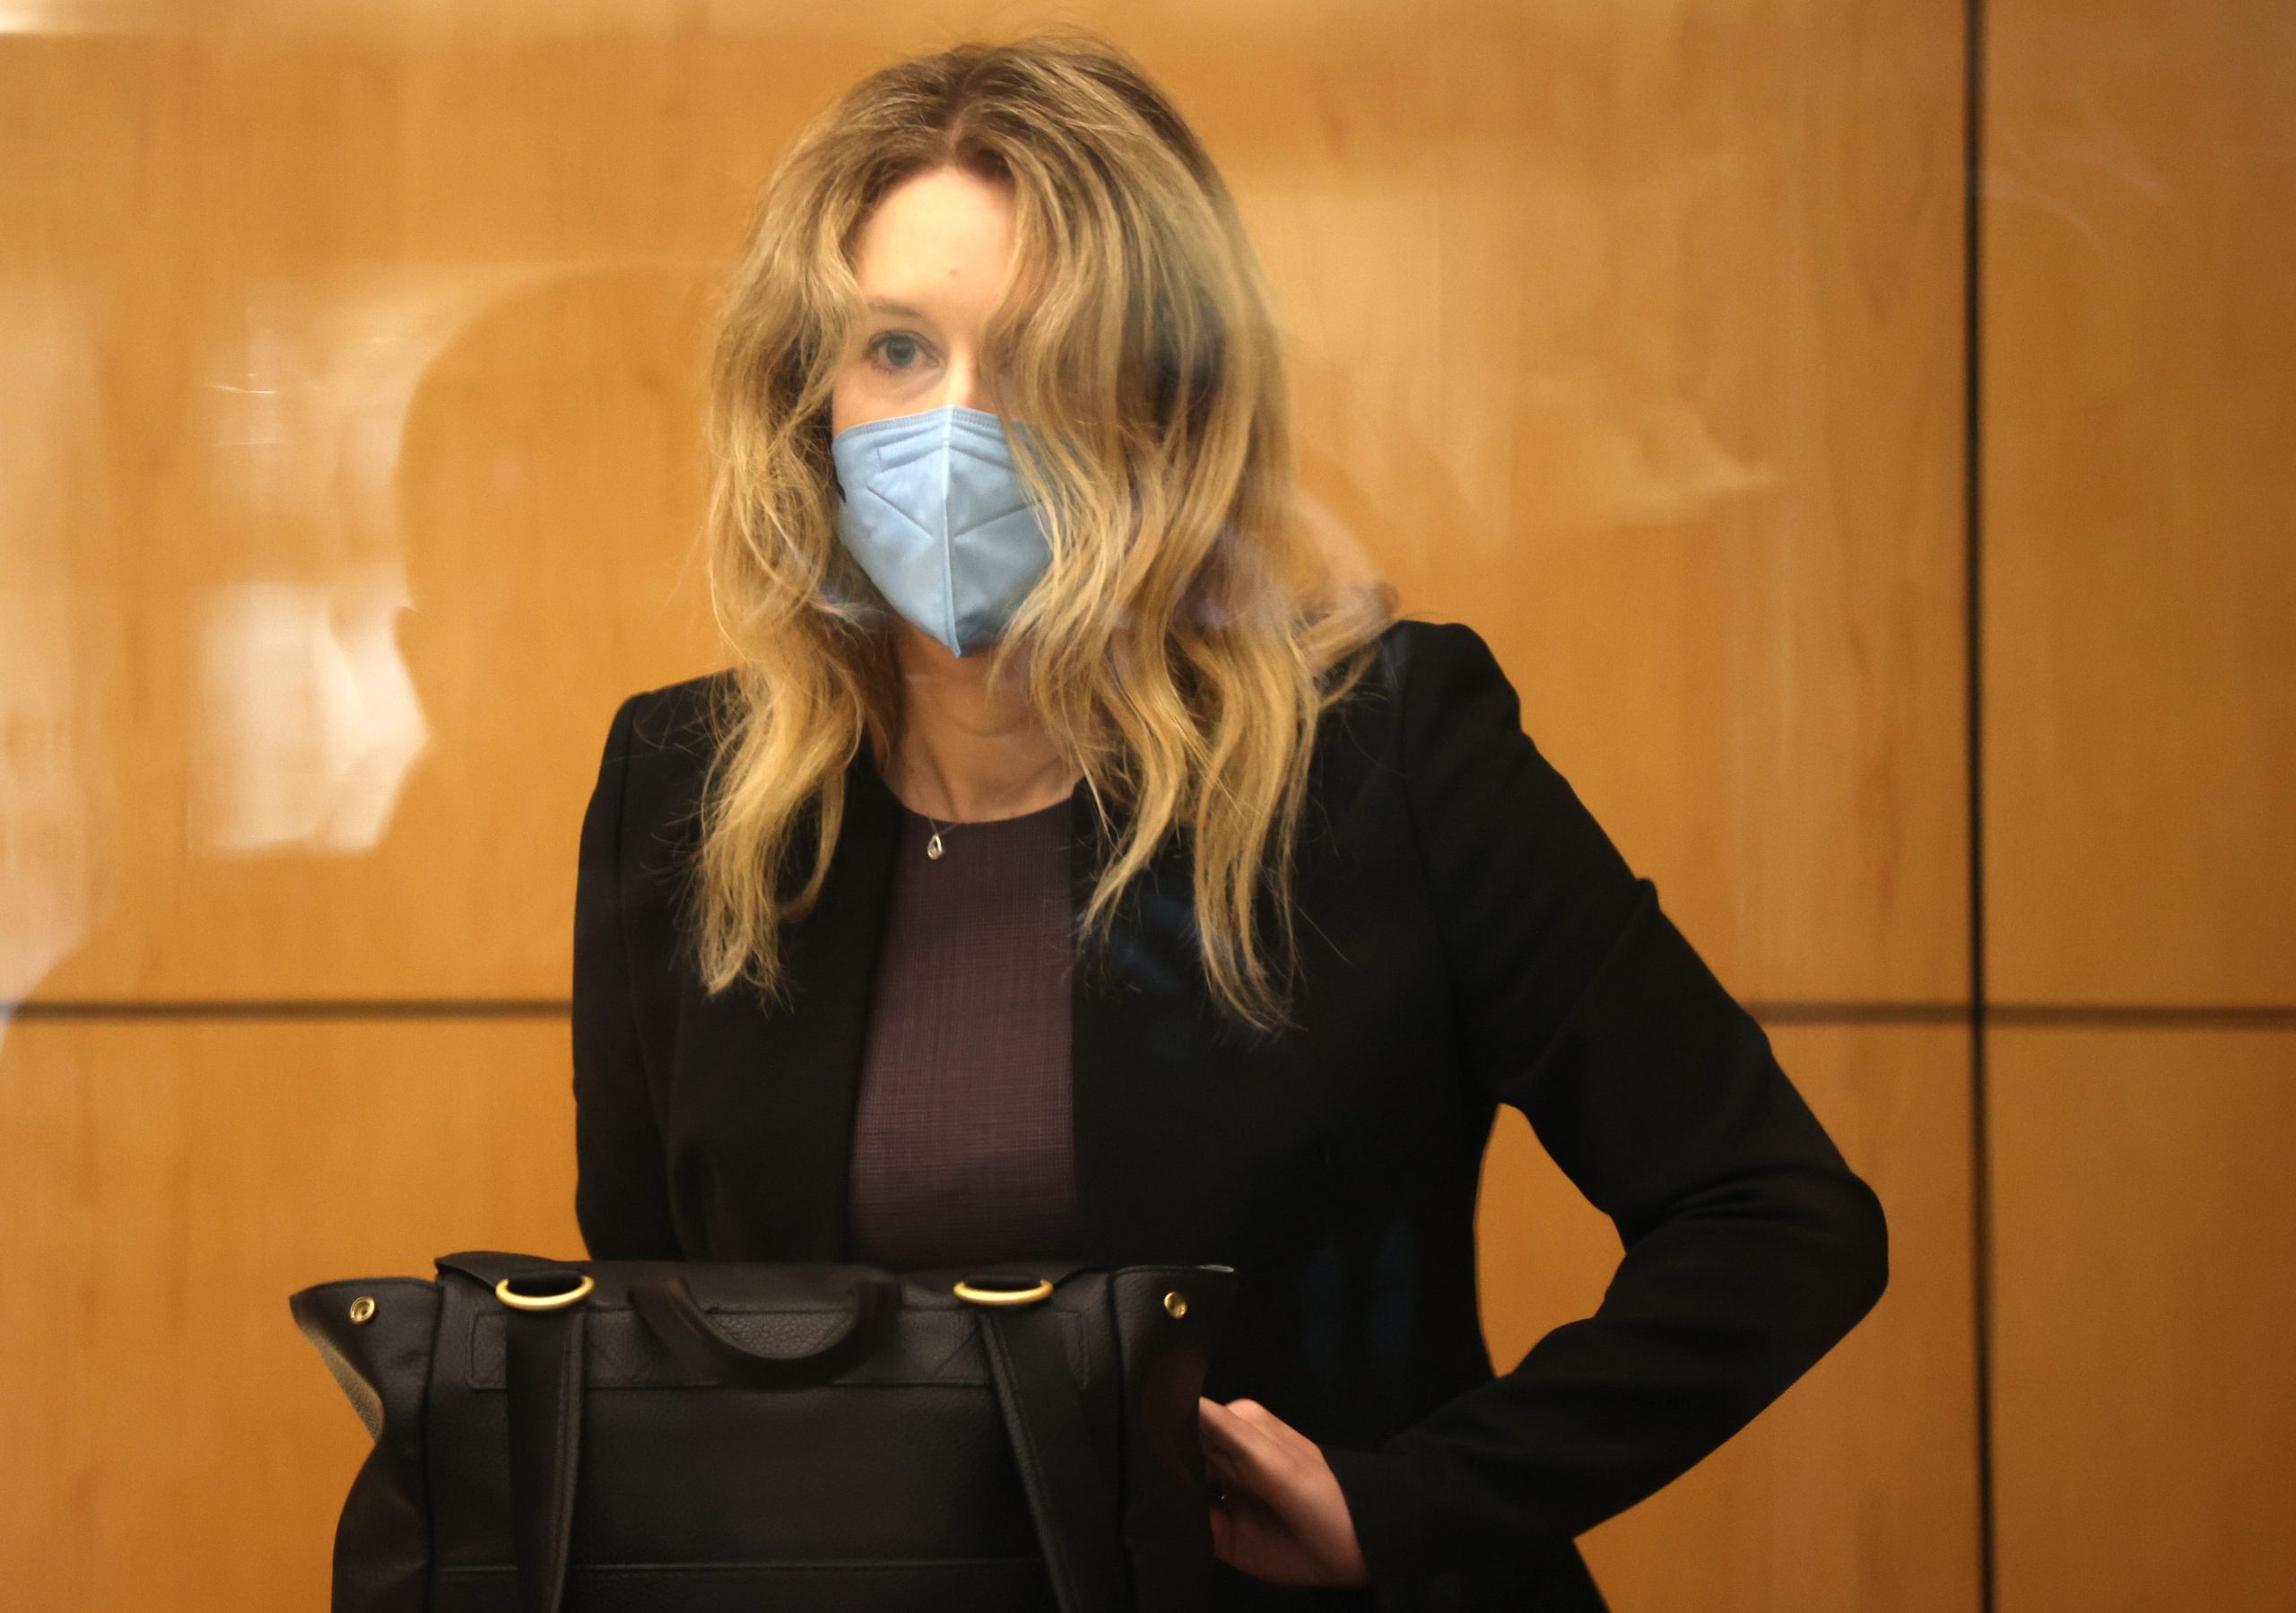 Theranos founder Elizabeth Holmes in a black suit jacket in a San Jose courtroom